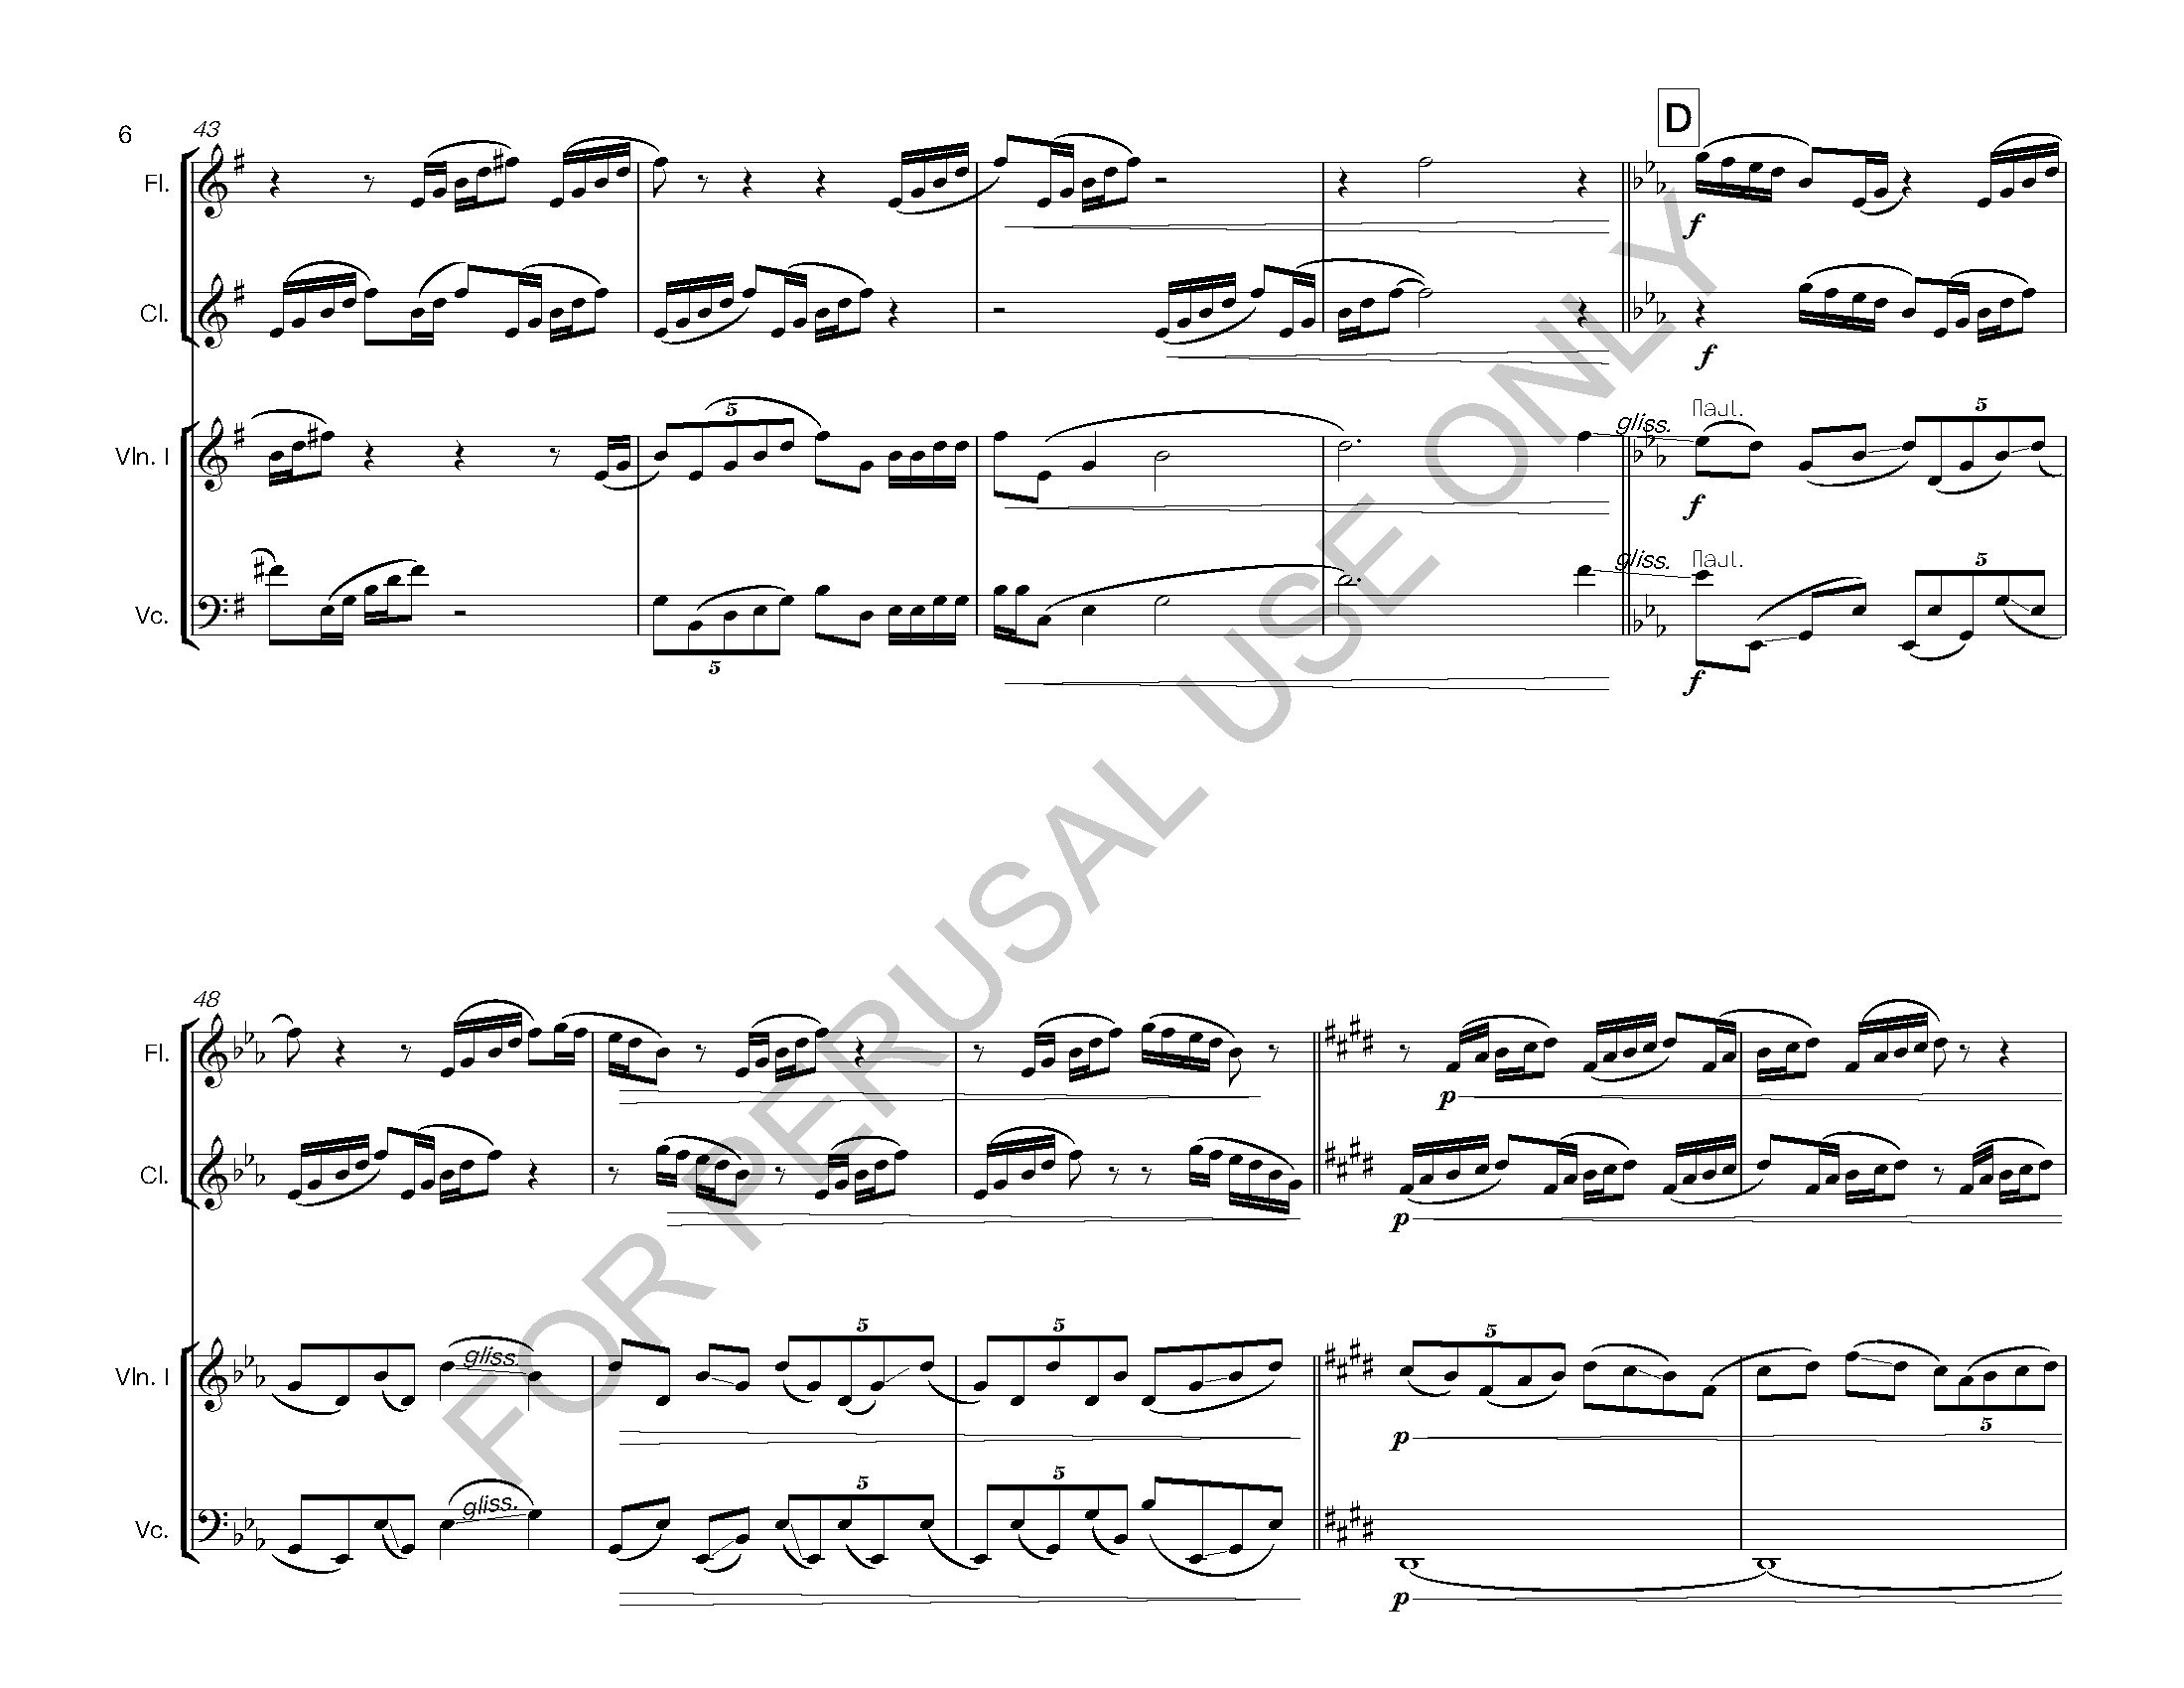 Thread the Needle - Full Score in C_Page_06.jpg